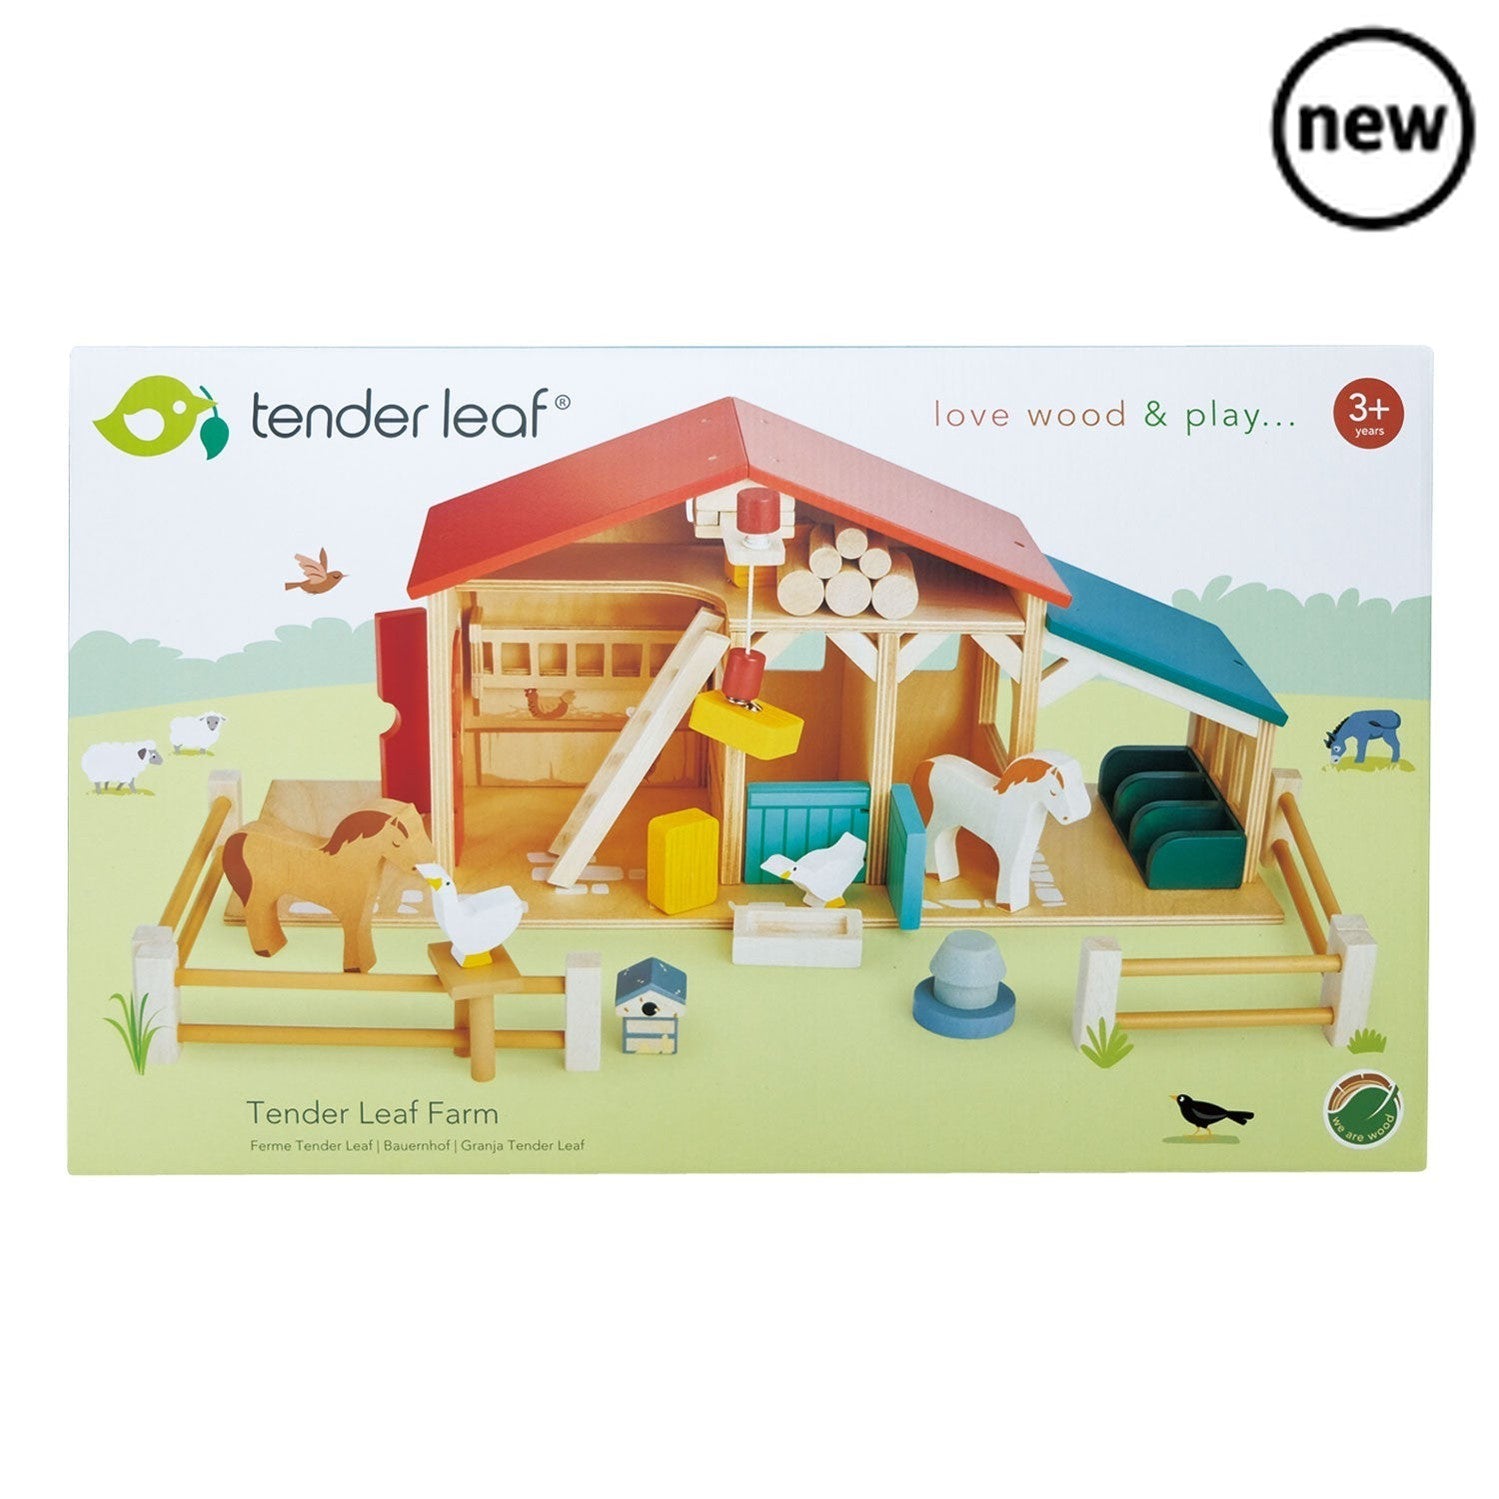 The Tenderleaf Farm, Designed and made by Tender Leaf ToysWelcome to the farm! Made throughout from top quality wood, this farm has been designed to be open and accessible for little hands. Product features: a barn with barn doors and a feeding trough, two stables with opening doors, a ladder leading to hay loft, a pulley system with a magnetic end to lift the hay bales, a cowshed with feeding compartments, four fences, a stile, three hay bales, two geese, two horses, a grain trough, an animal feeding troug